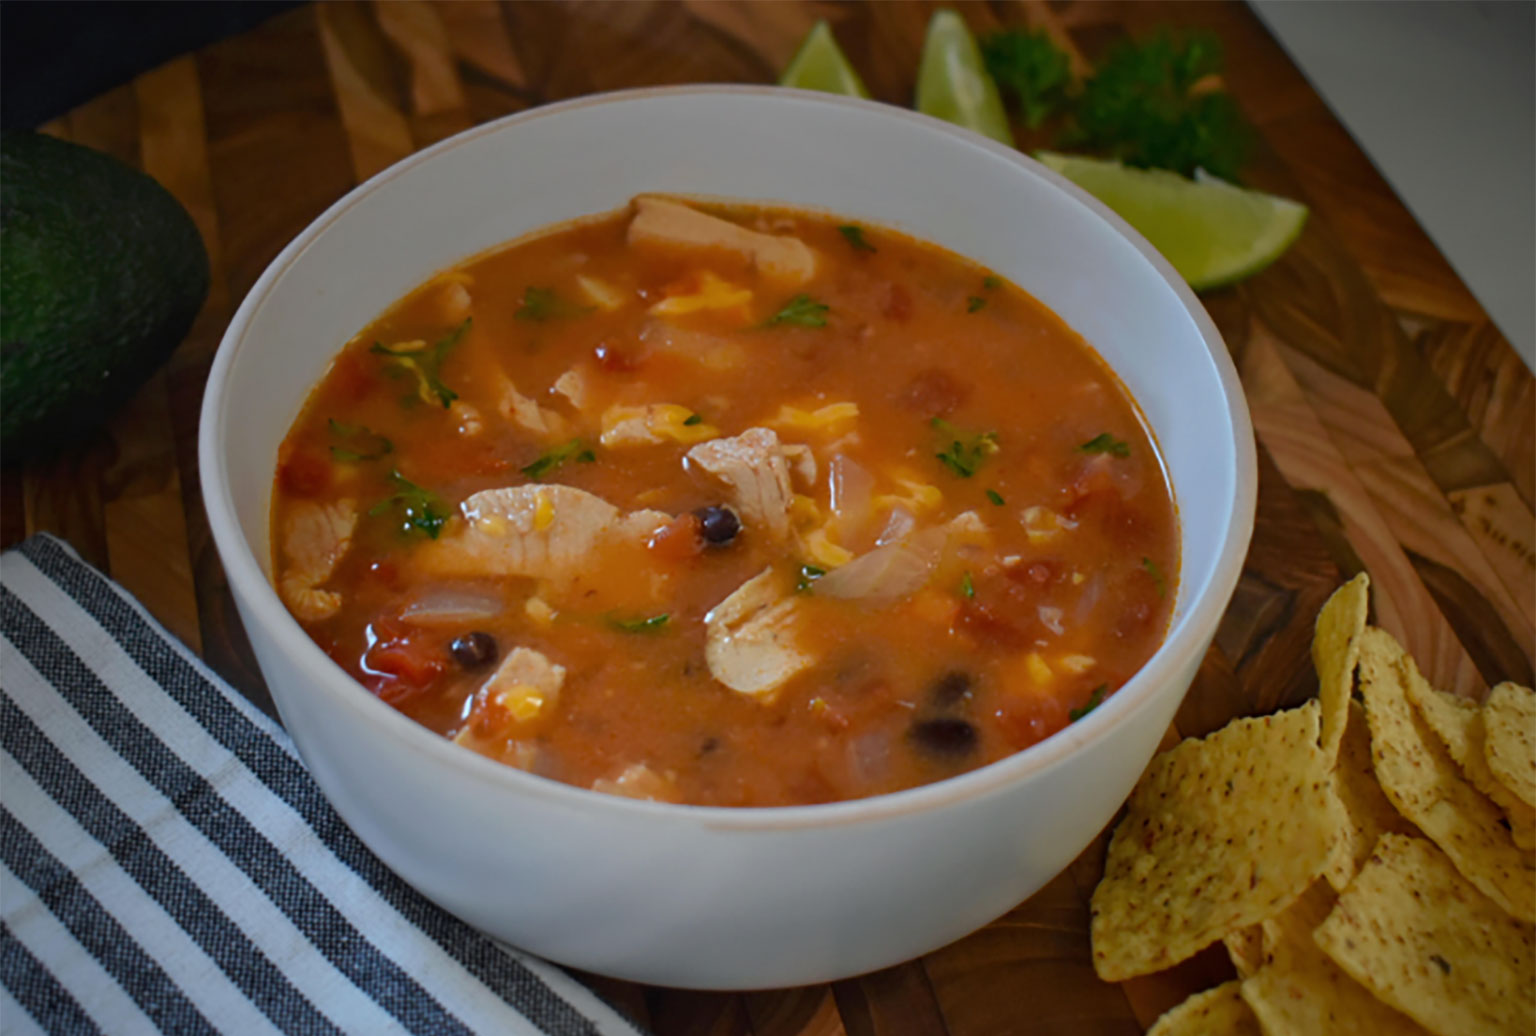 Turkey tortilla soup, new flavor to Thanksgiving leftovers - Seasons